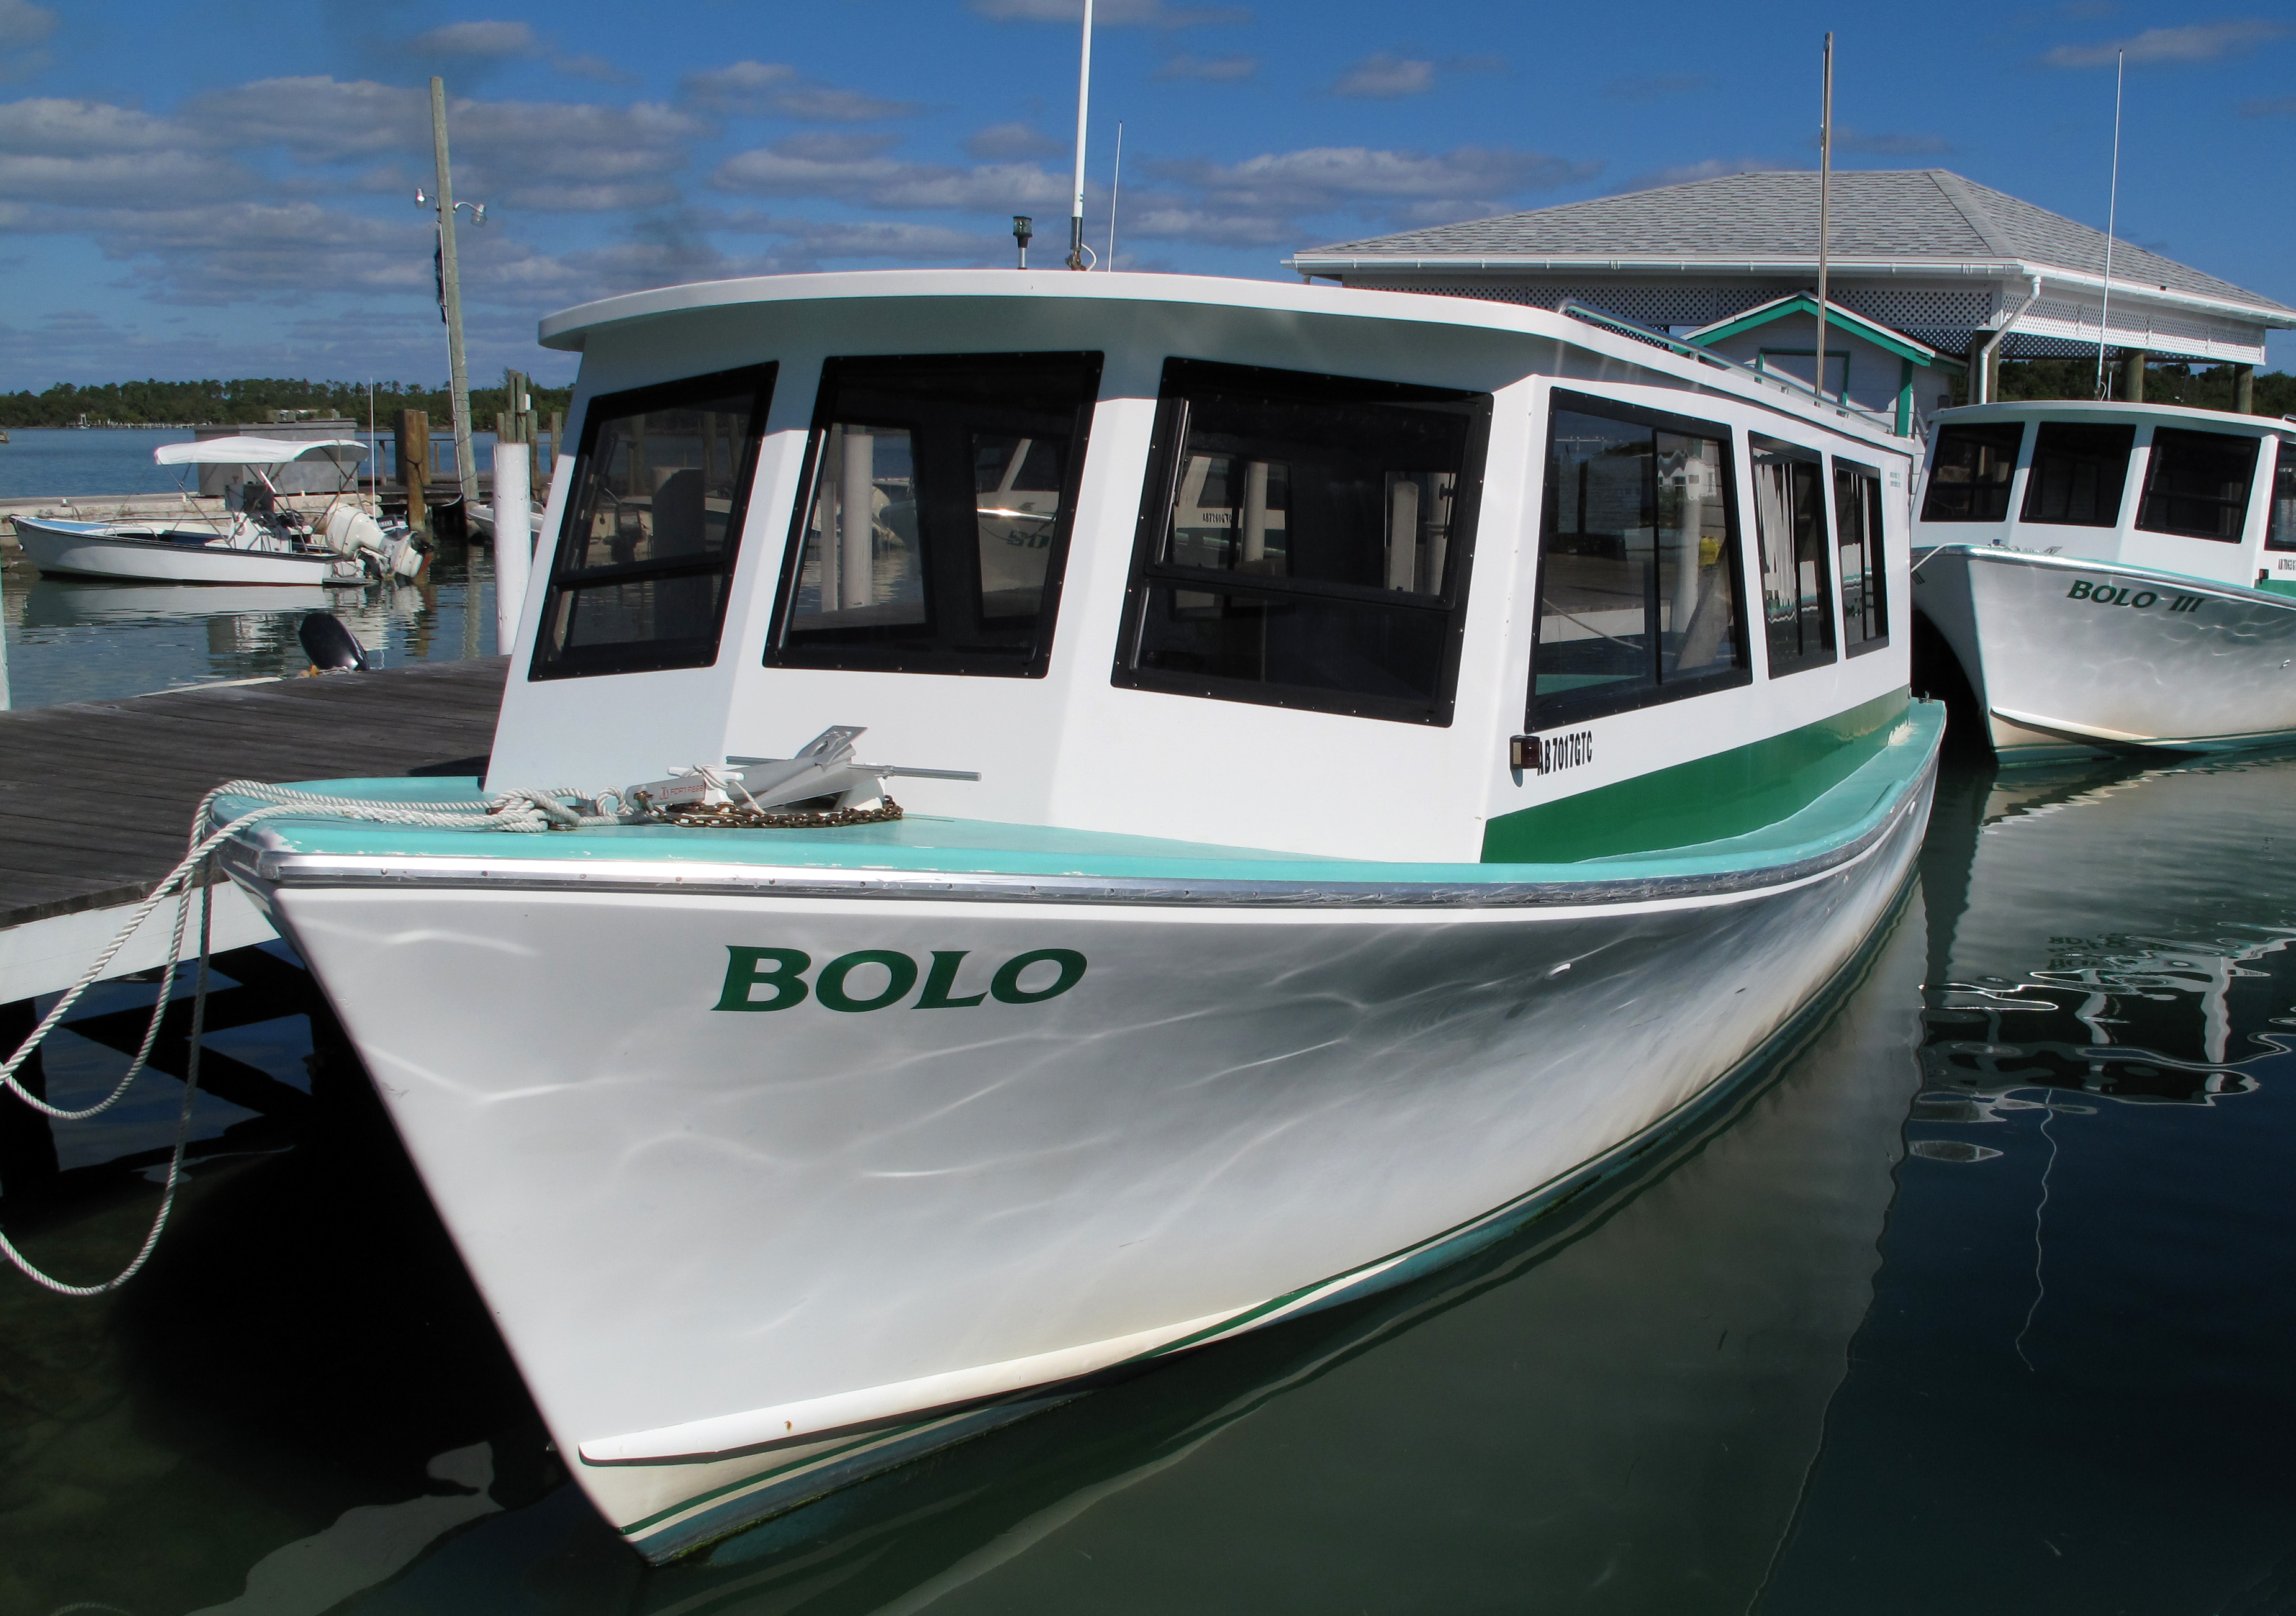 Why the Green Turtle Cay Ferries Are Called Bolo